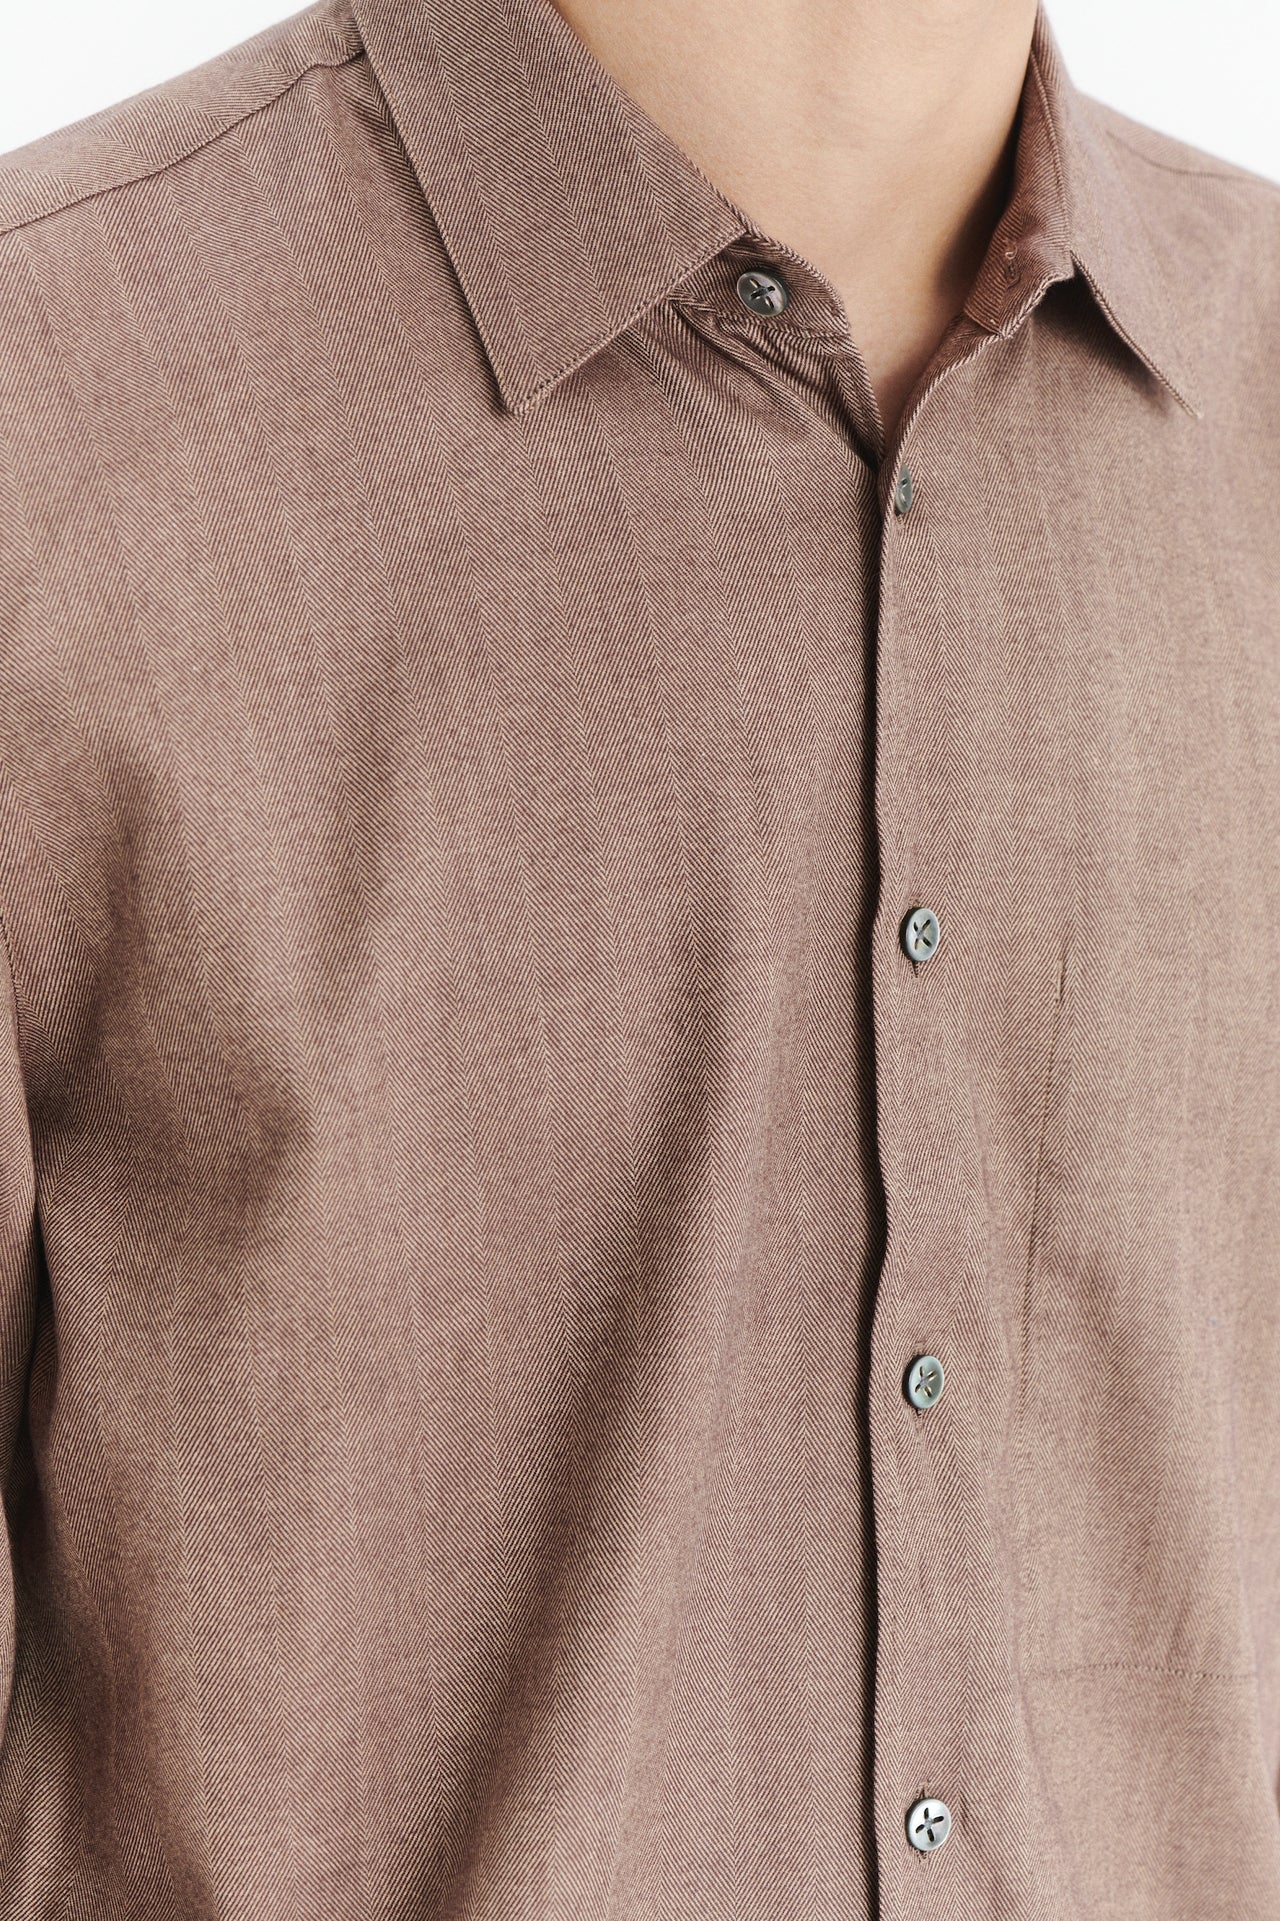 Feel Good Shirt in a Cinnamon Soft Italian Cotton and Lyocell Flannel